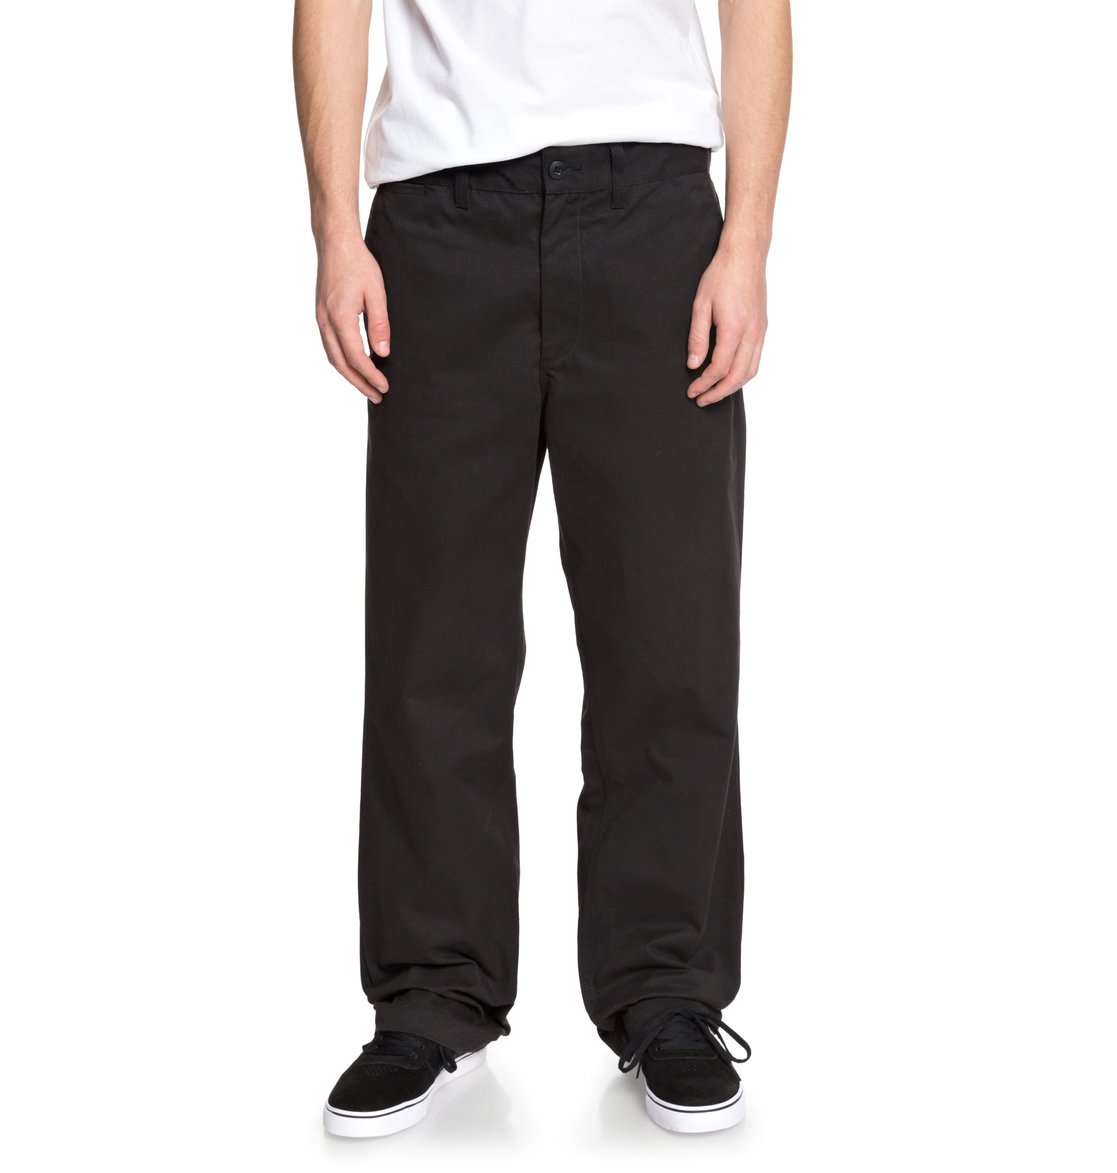 Men's Alive Set Baggy Chinos EDYNP03126 | DC Shoes